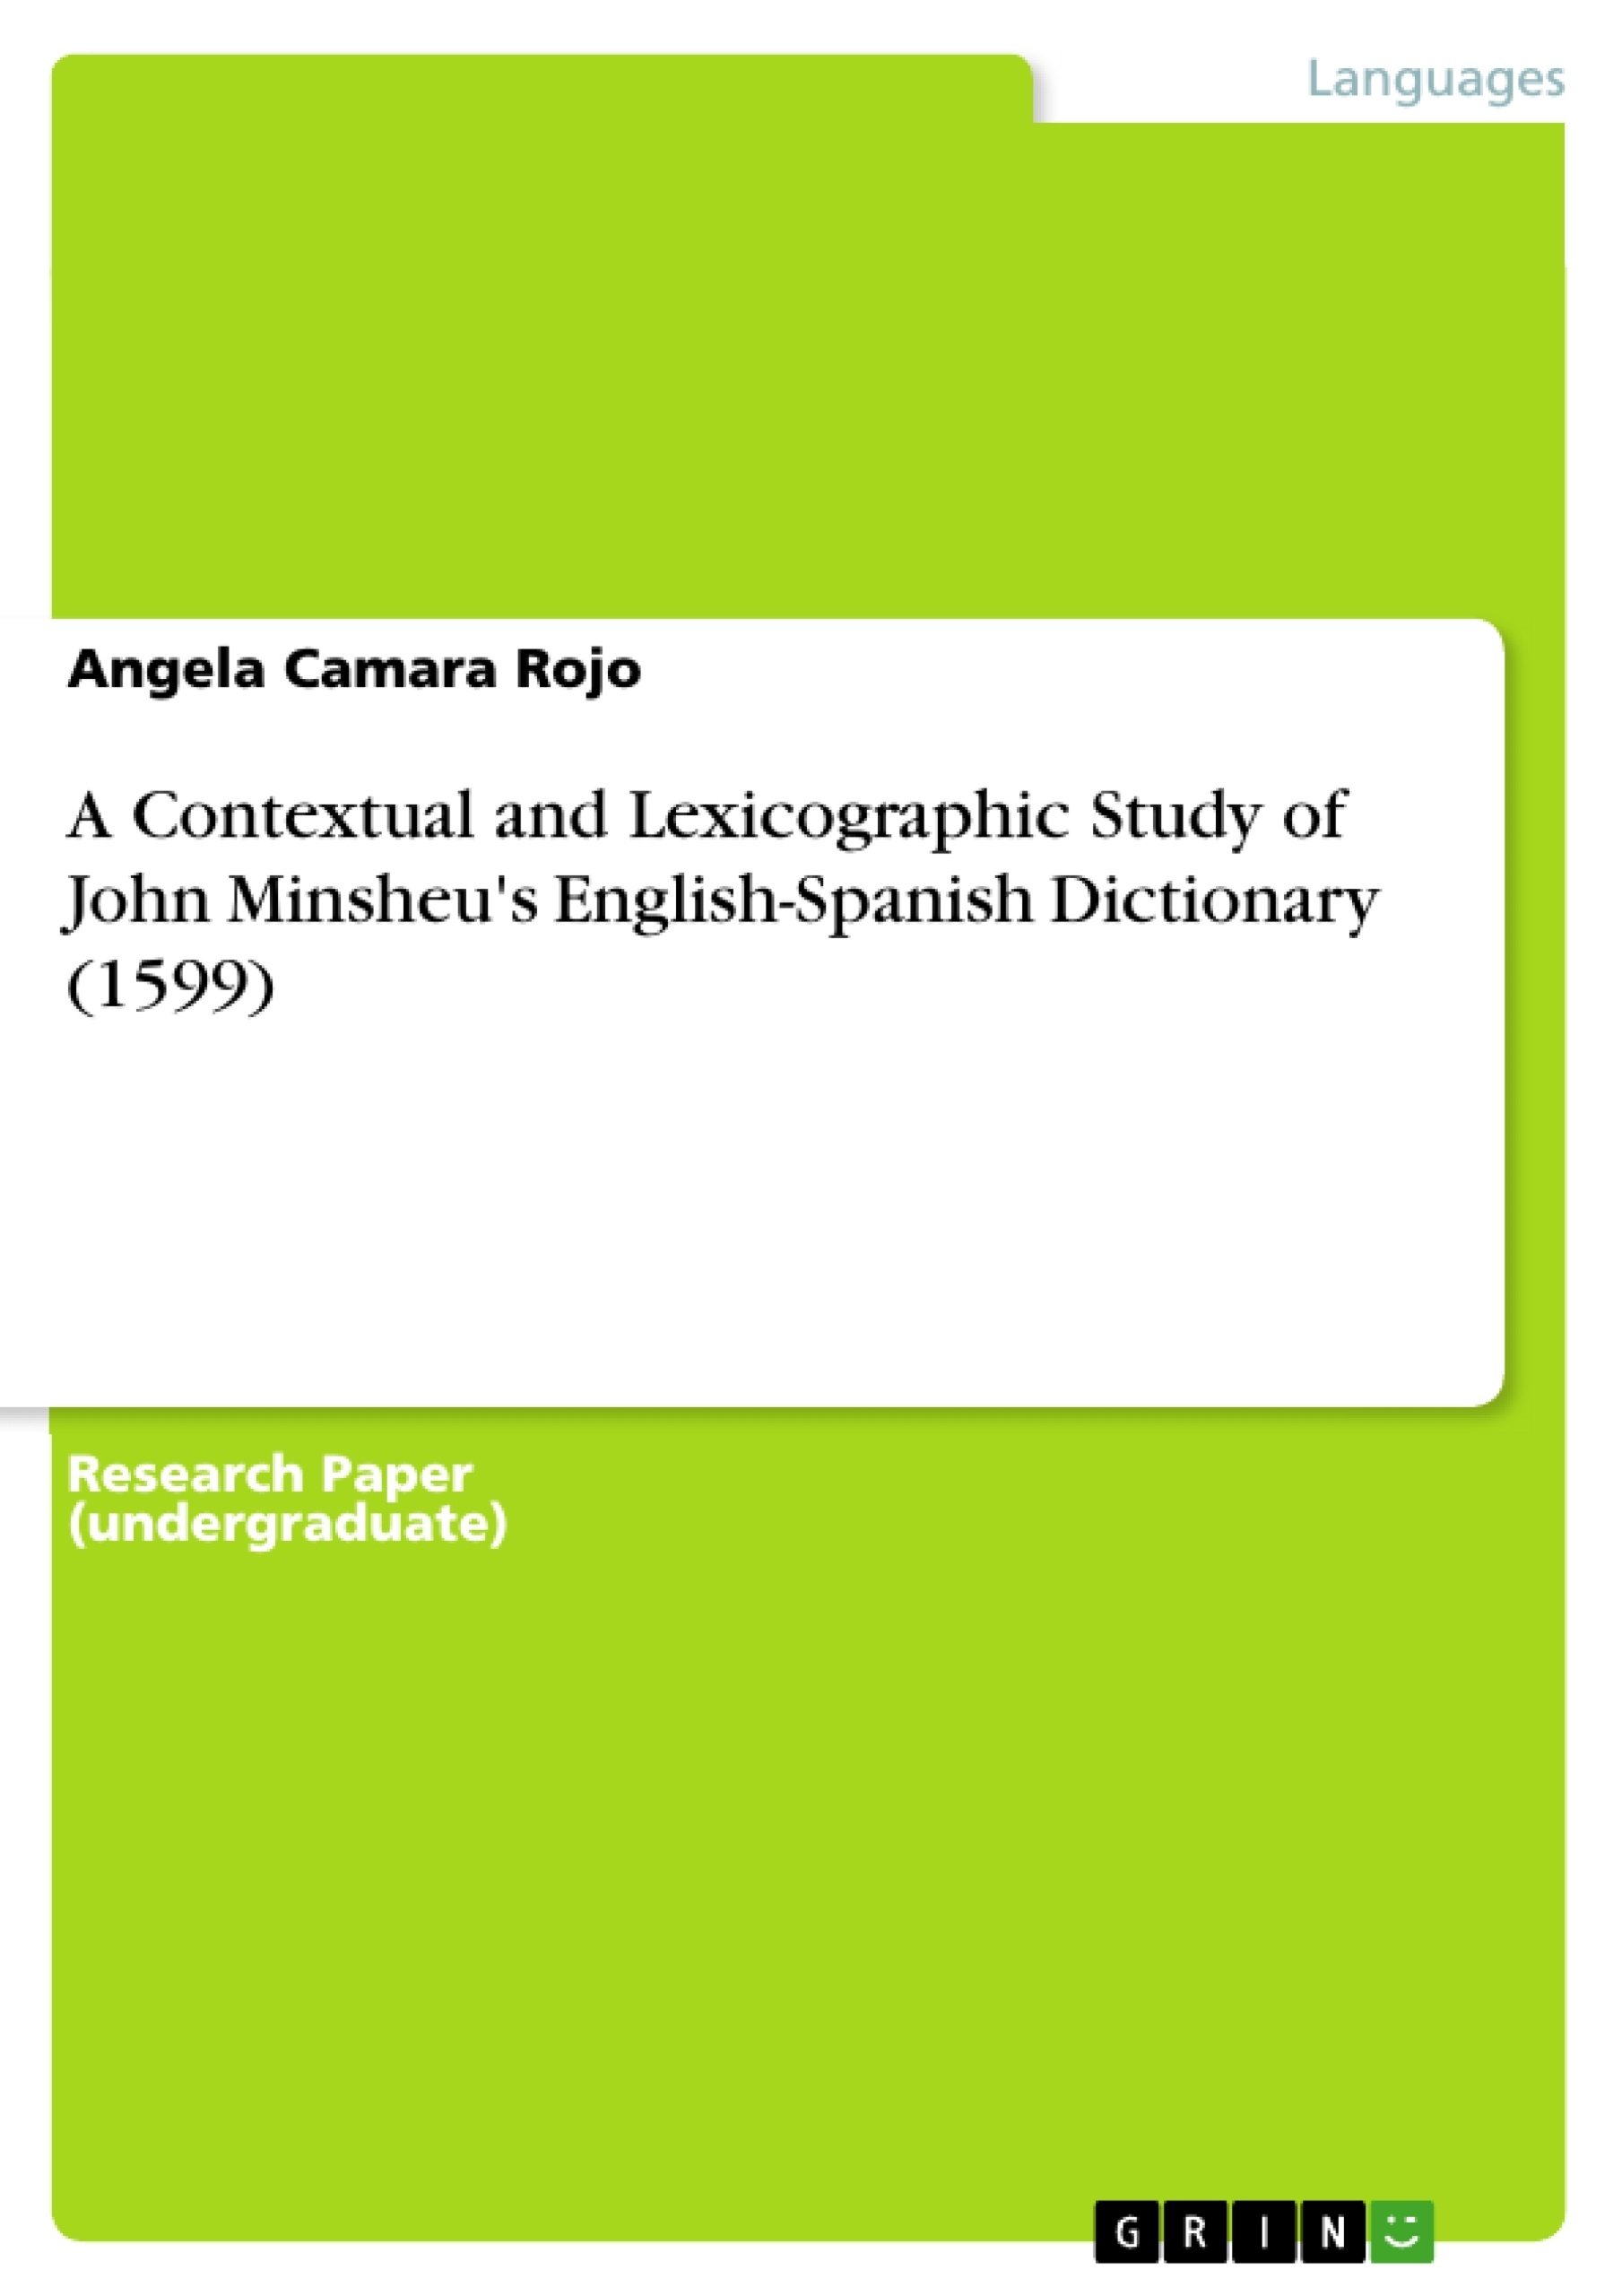 Title: A Contextual and Lexicographic Study of John Minsheu's English-Spanish Dictionary (1599)